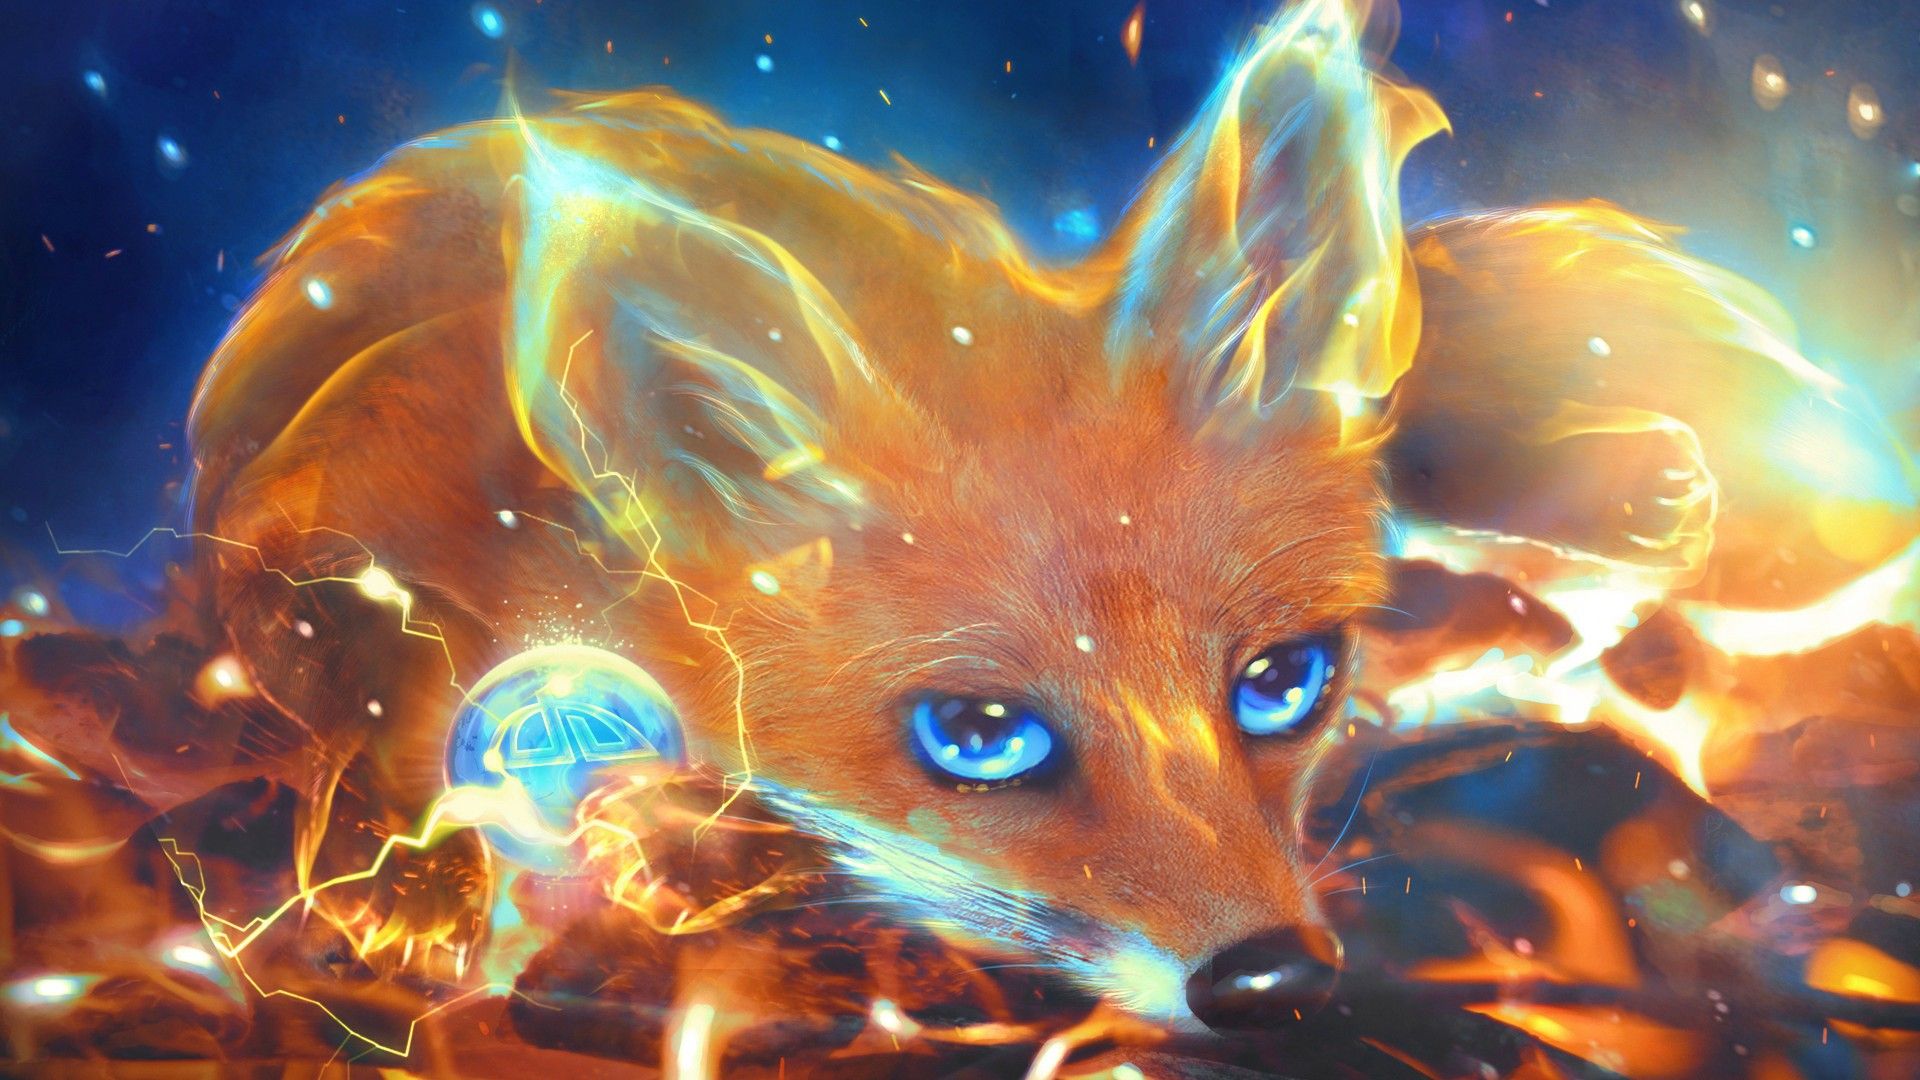 The Fox Anime Wallpaper Background Kitsune Pictures Background Image And  Wallpaper for Free Download